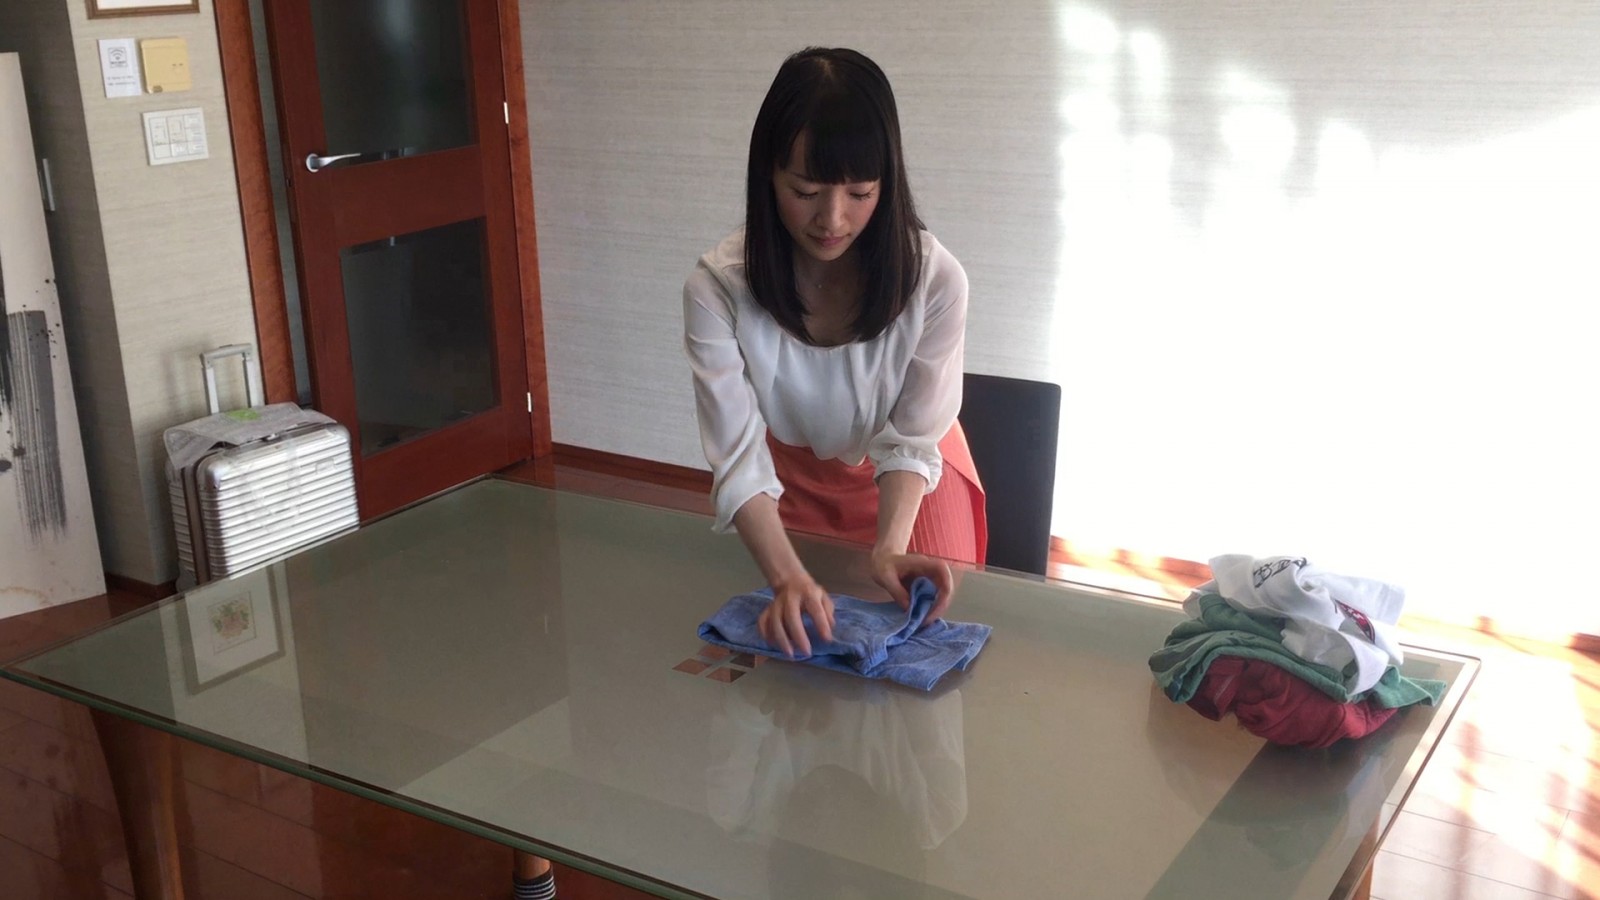 Marie Kondo Shows You How To Fold And Store A Shirt